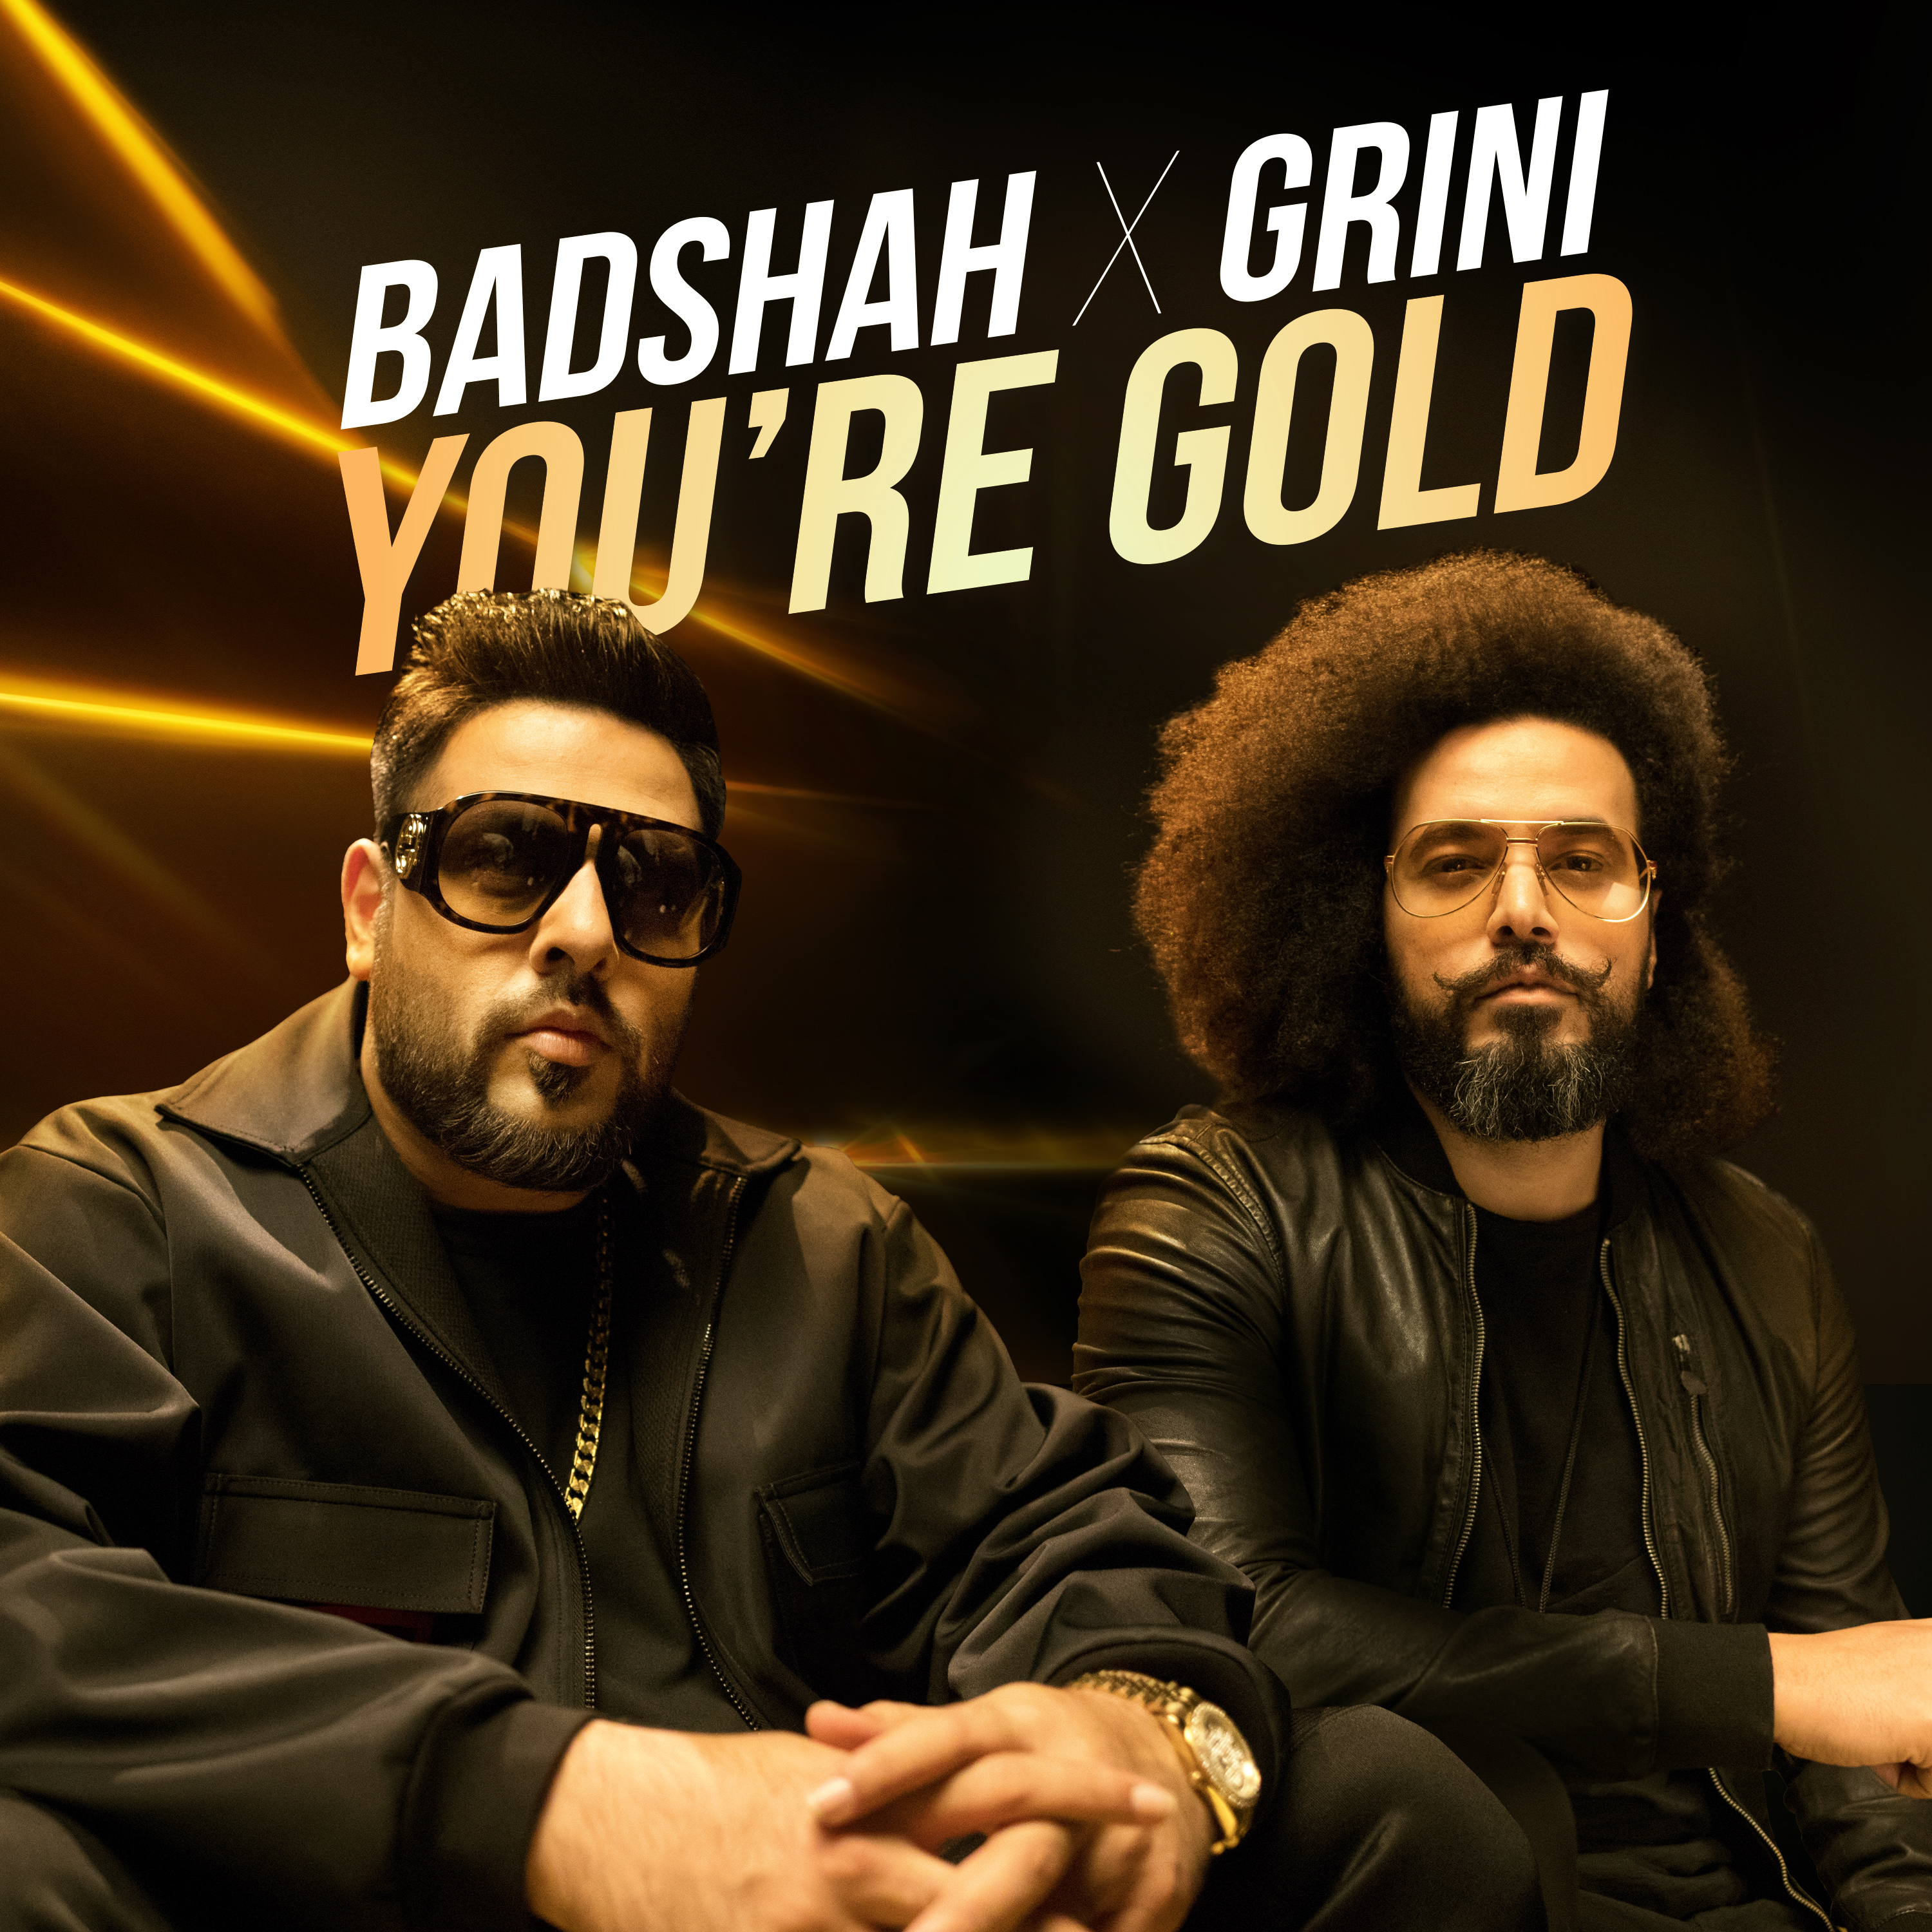 India Meets Morocco in “You’re Gold”